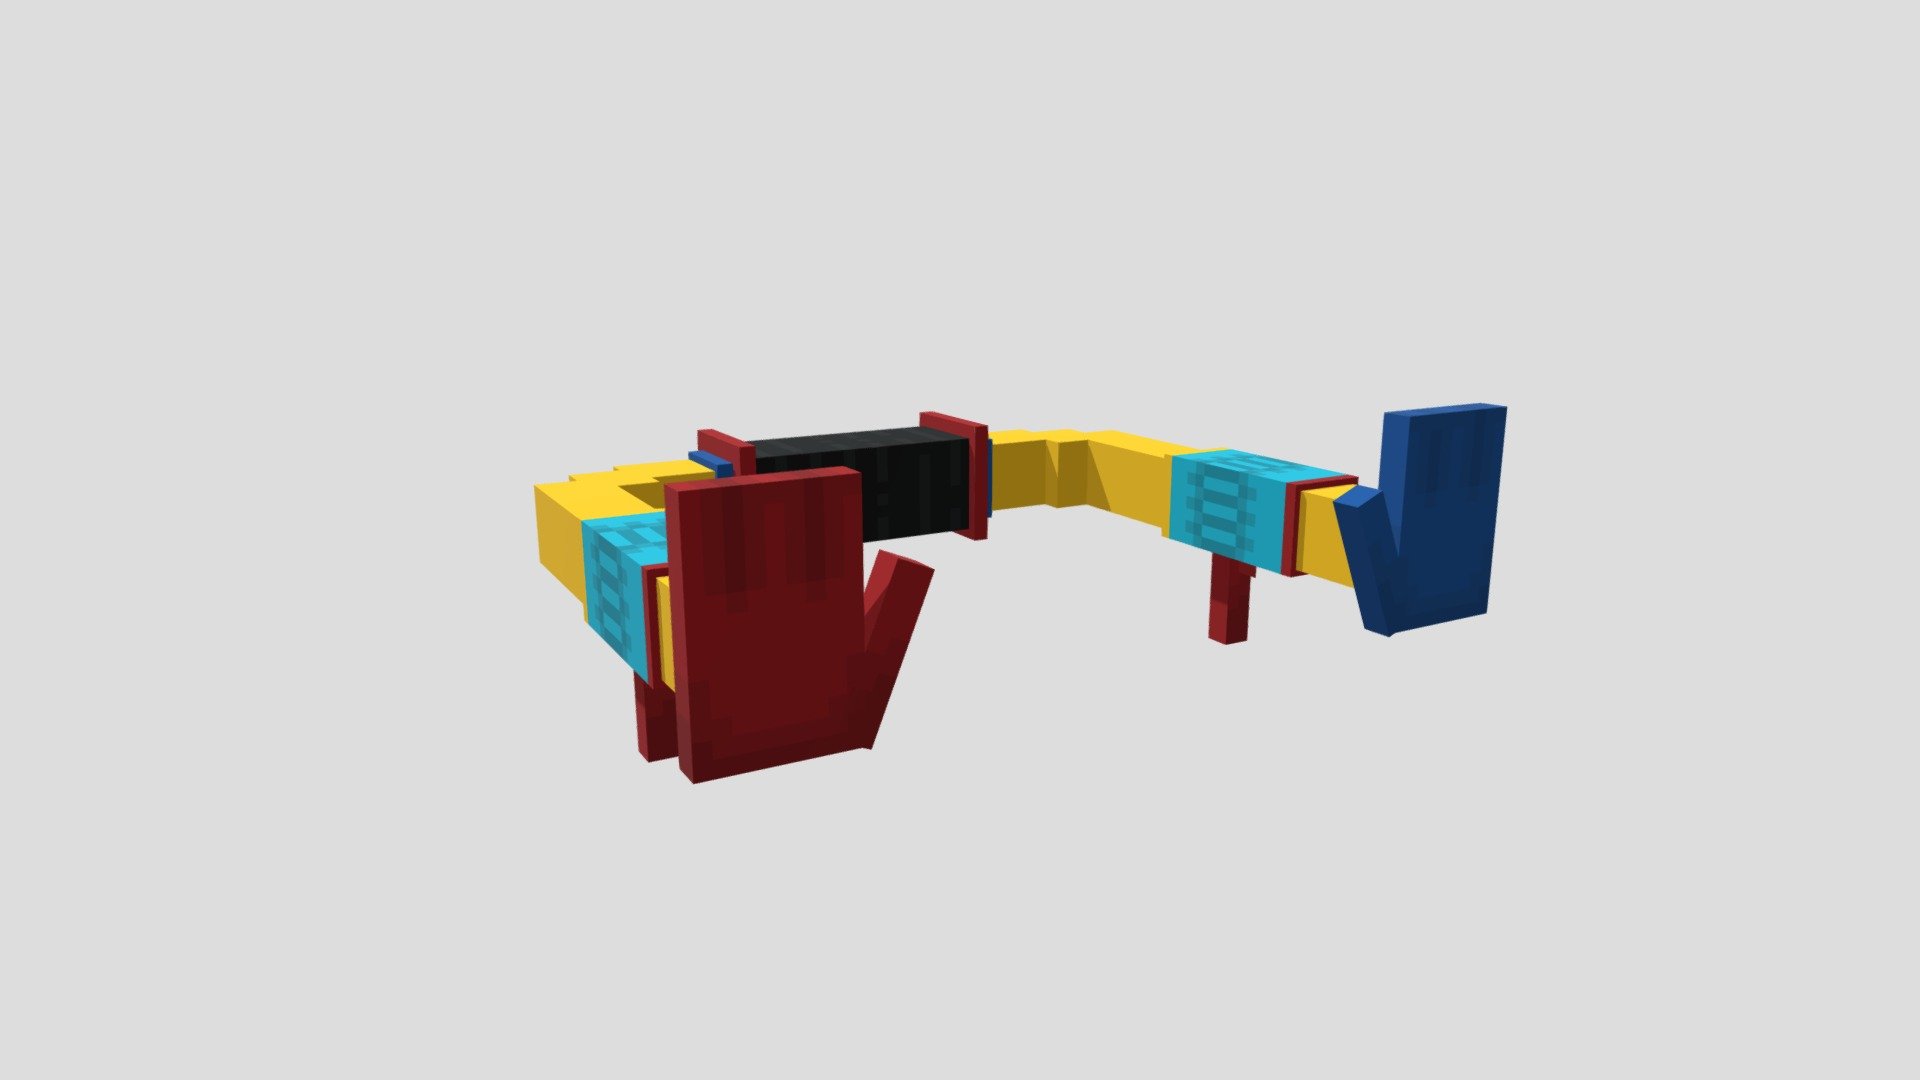 Looking to hire someone to 3d model a grab pack from Poppy Playtime.